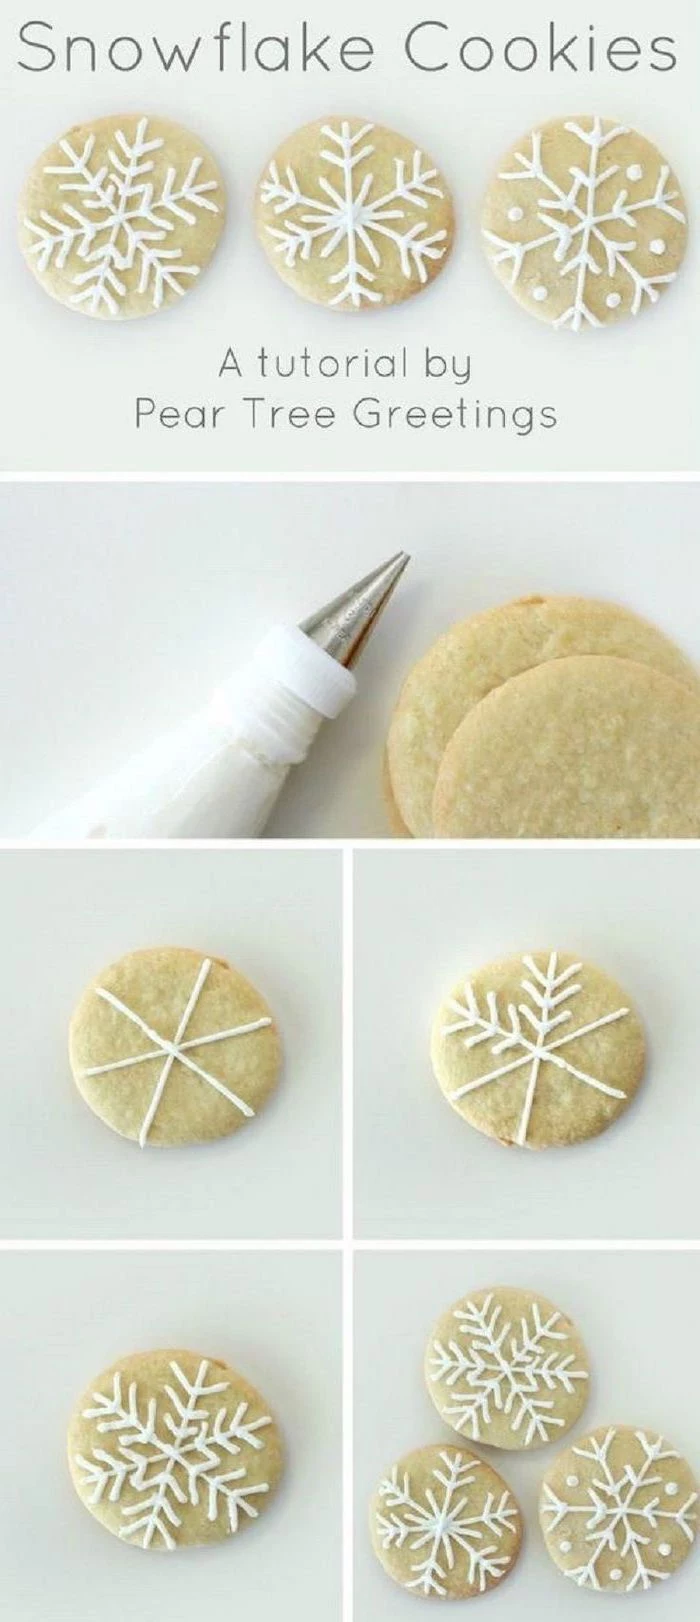 how to decorate snowflake cookies, step by step diy tutorial, royal icing christmas cookies, photo collage